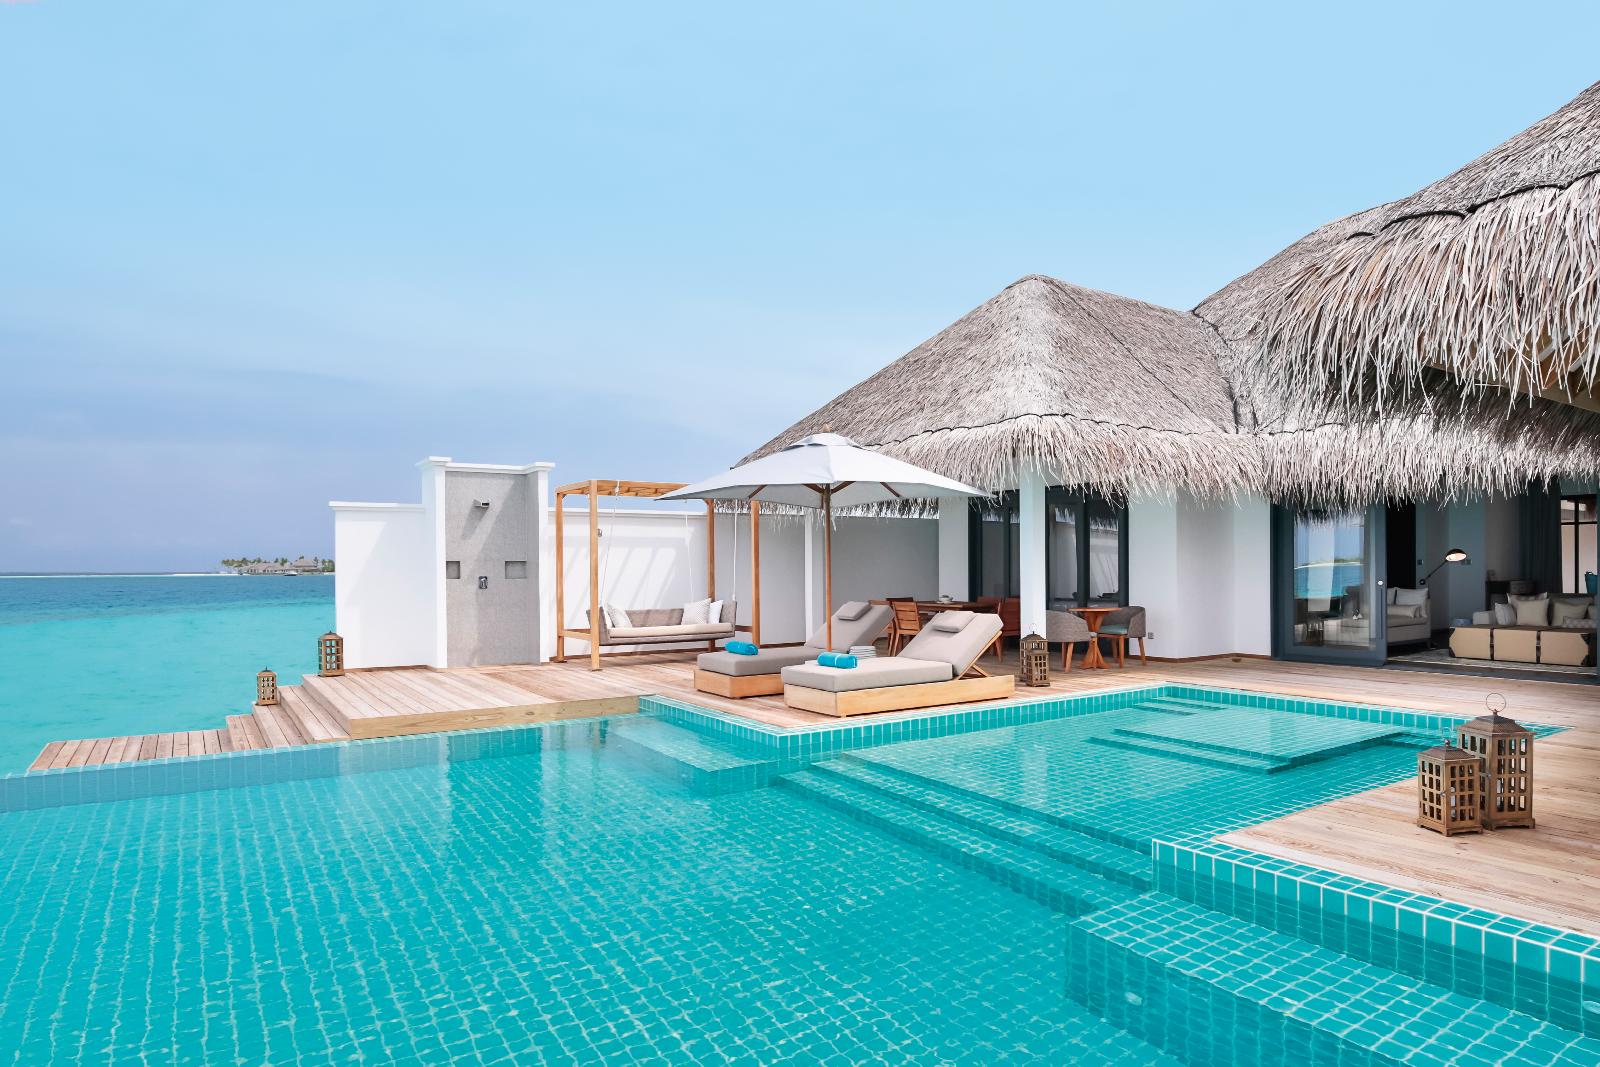 The swimming pool and facade of an ocean pool villa of Finolhu, Maldives